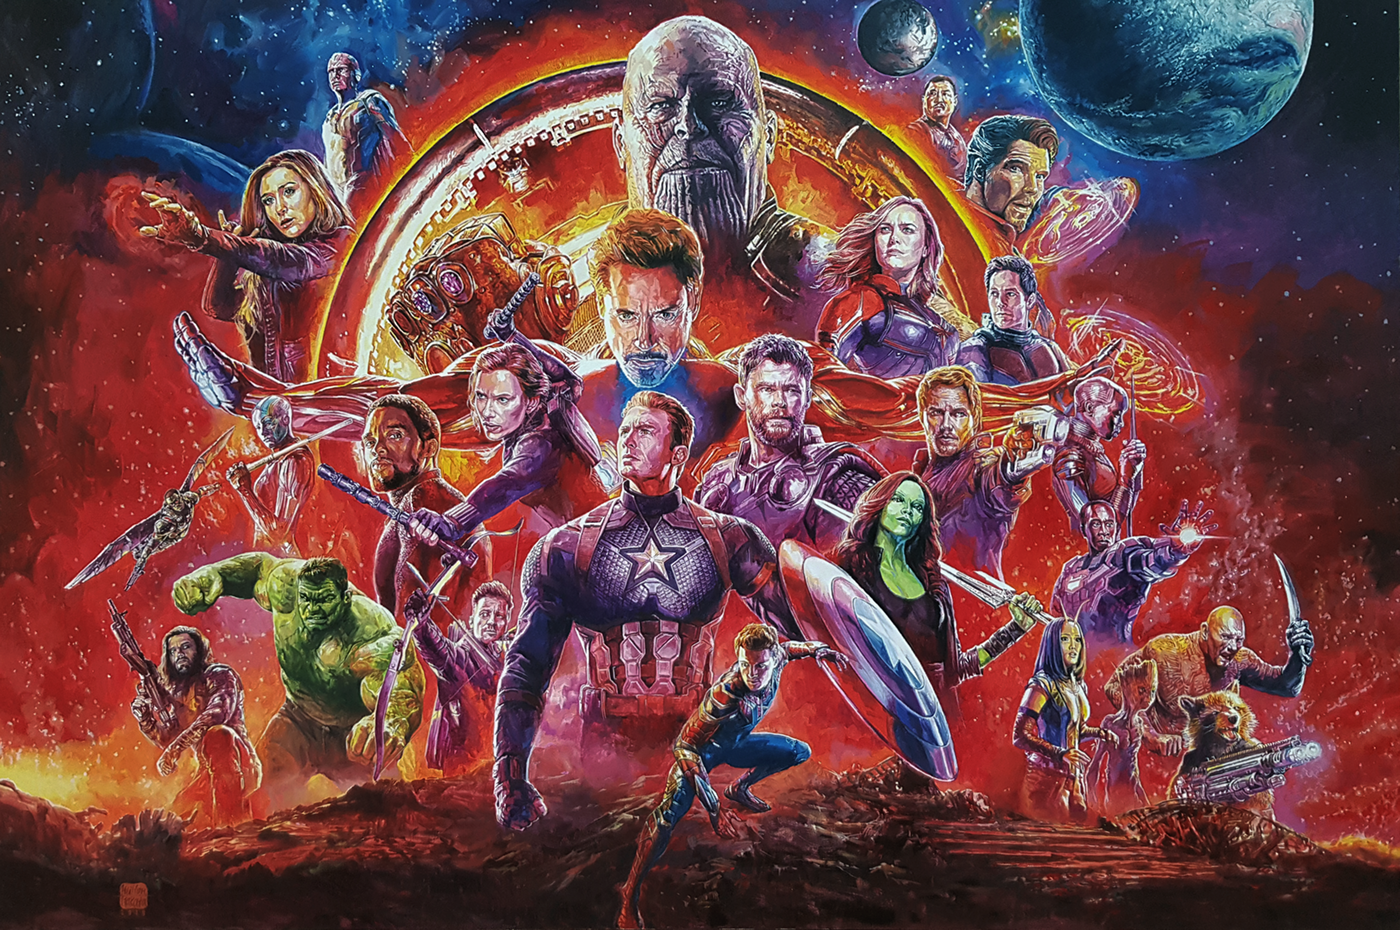 Avengers oil on canvas traditional painting vingadores fanart Oil Painting marvel Thanos tony stark